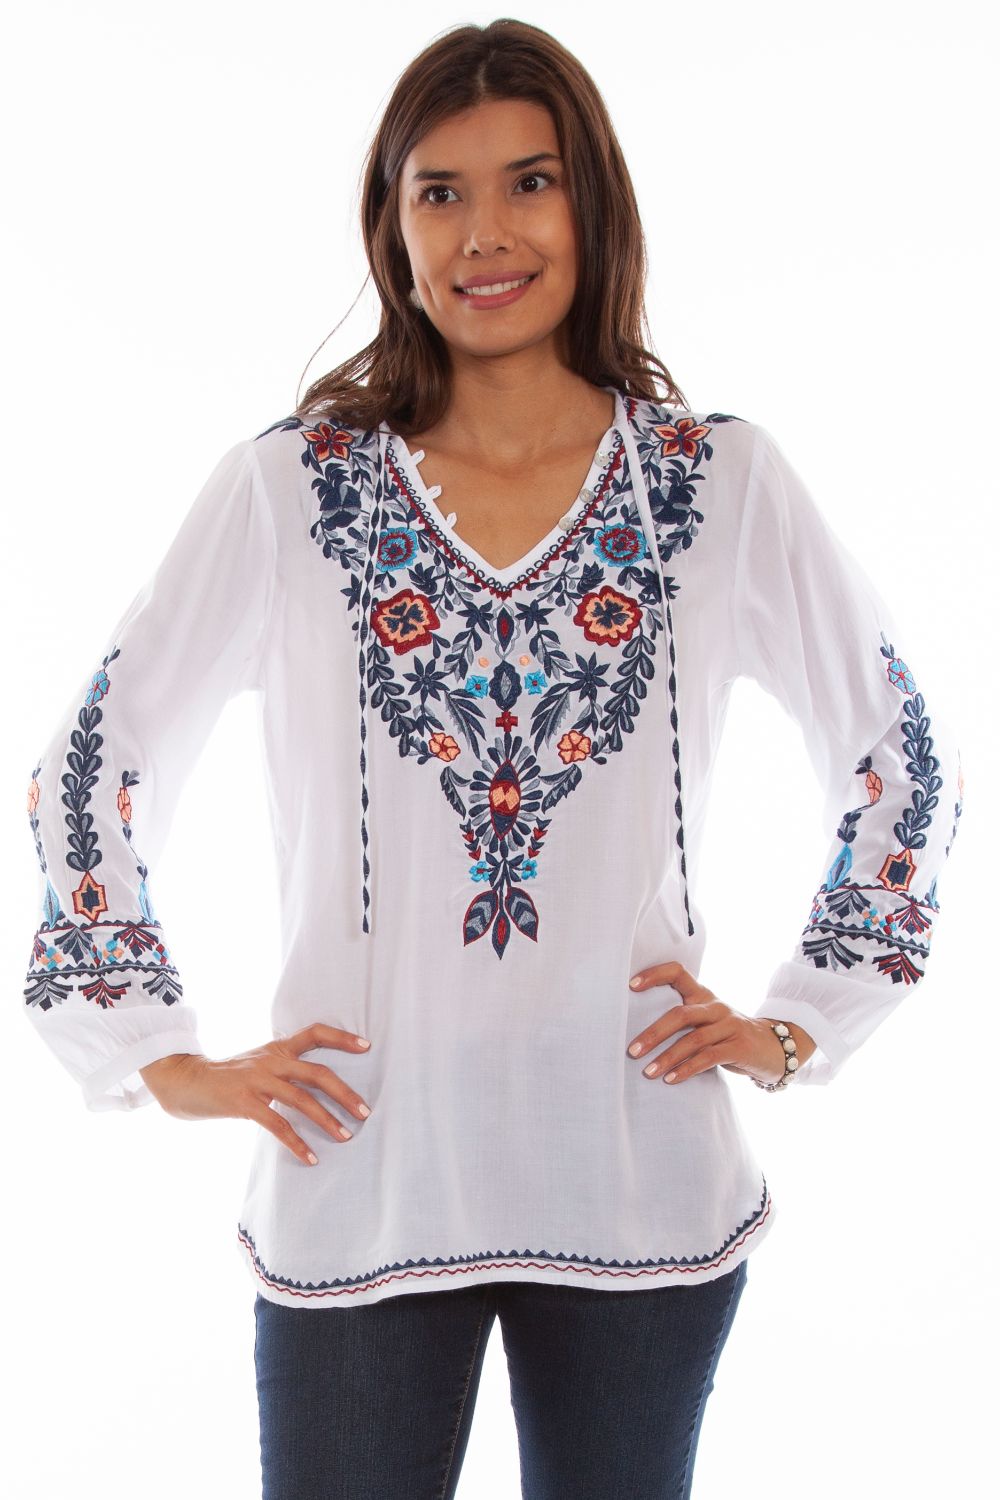 White V-Neck Top w/ Embroidery